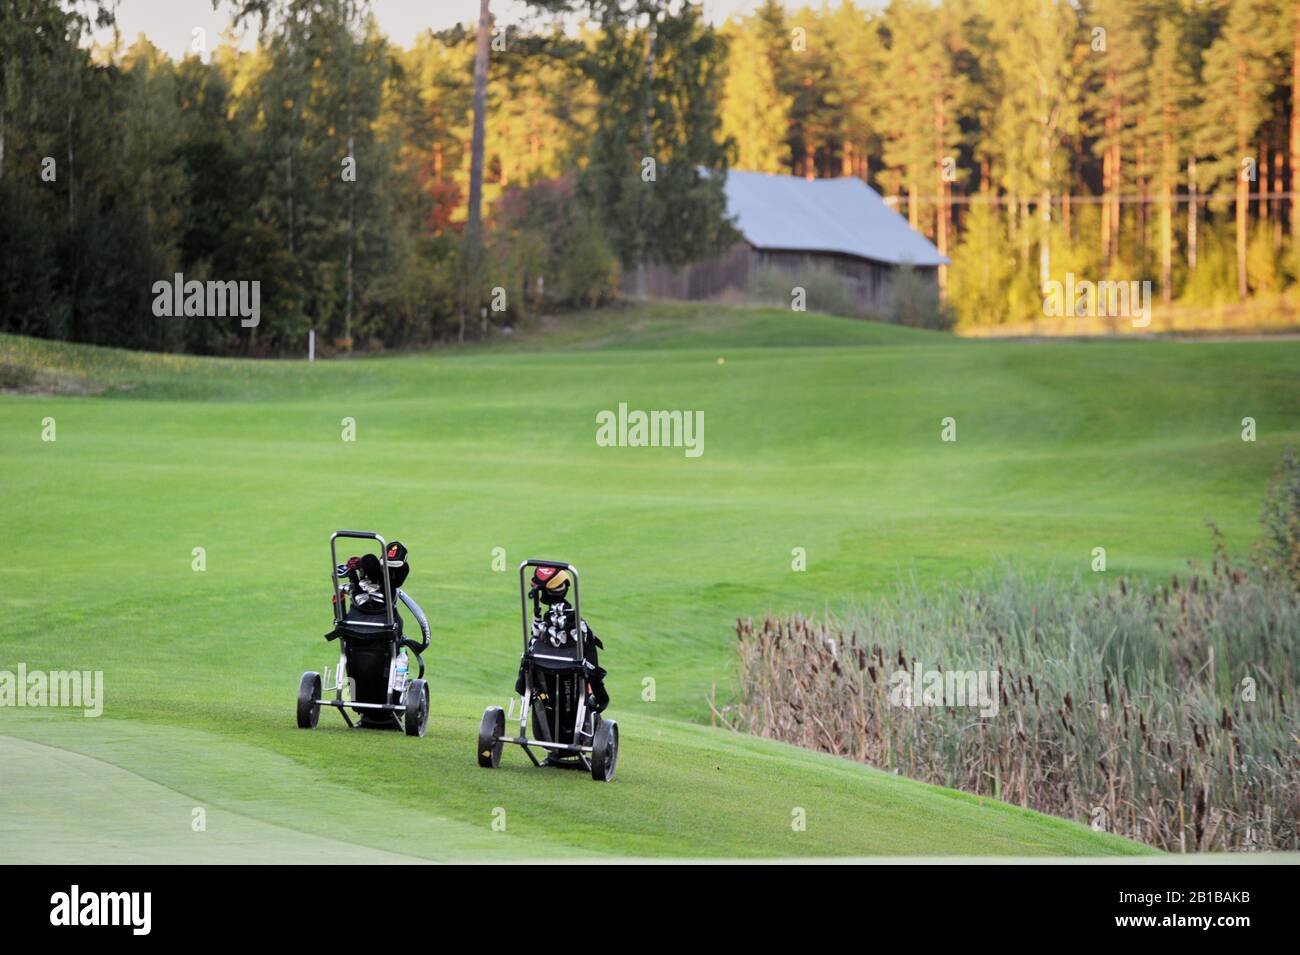 Golf bags on golf course Stock Photo